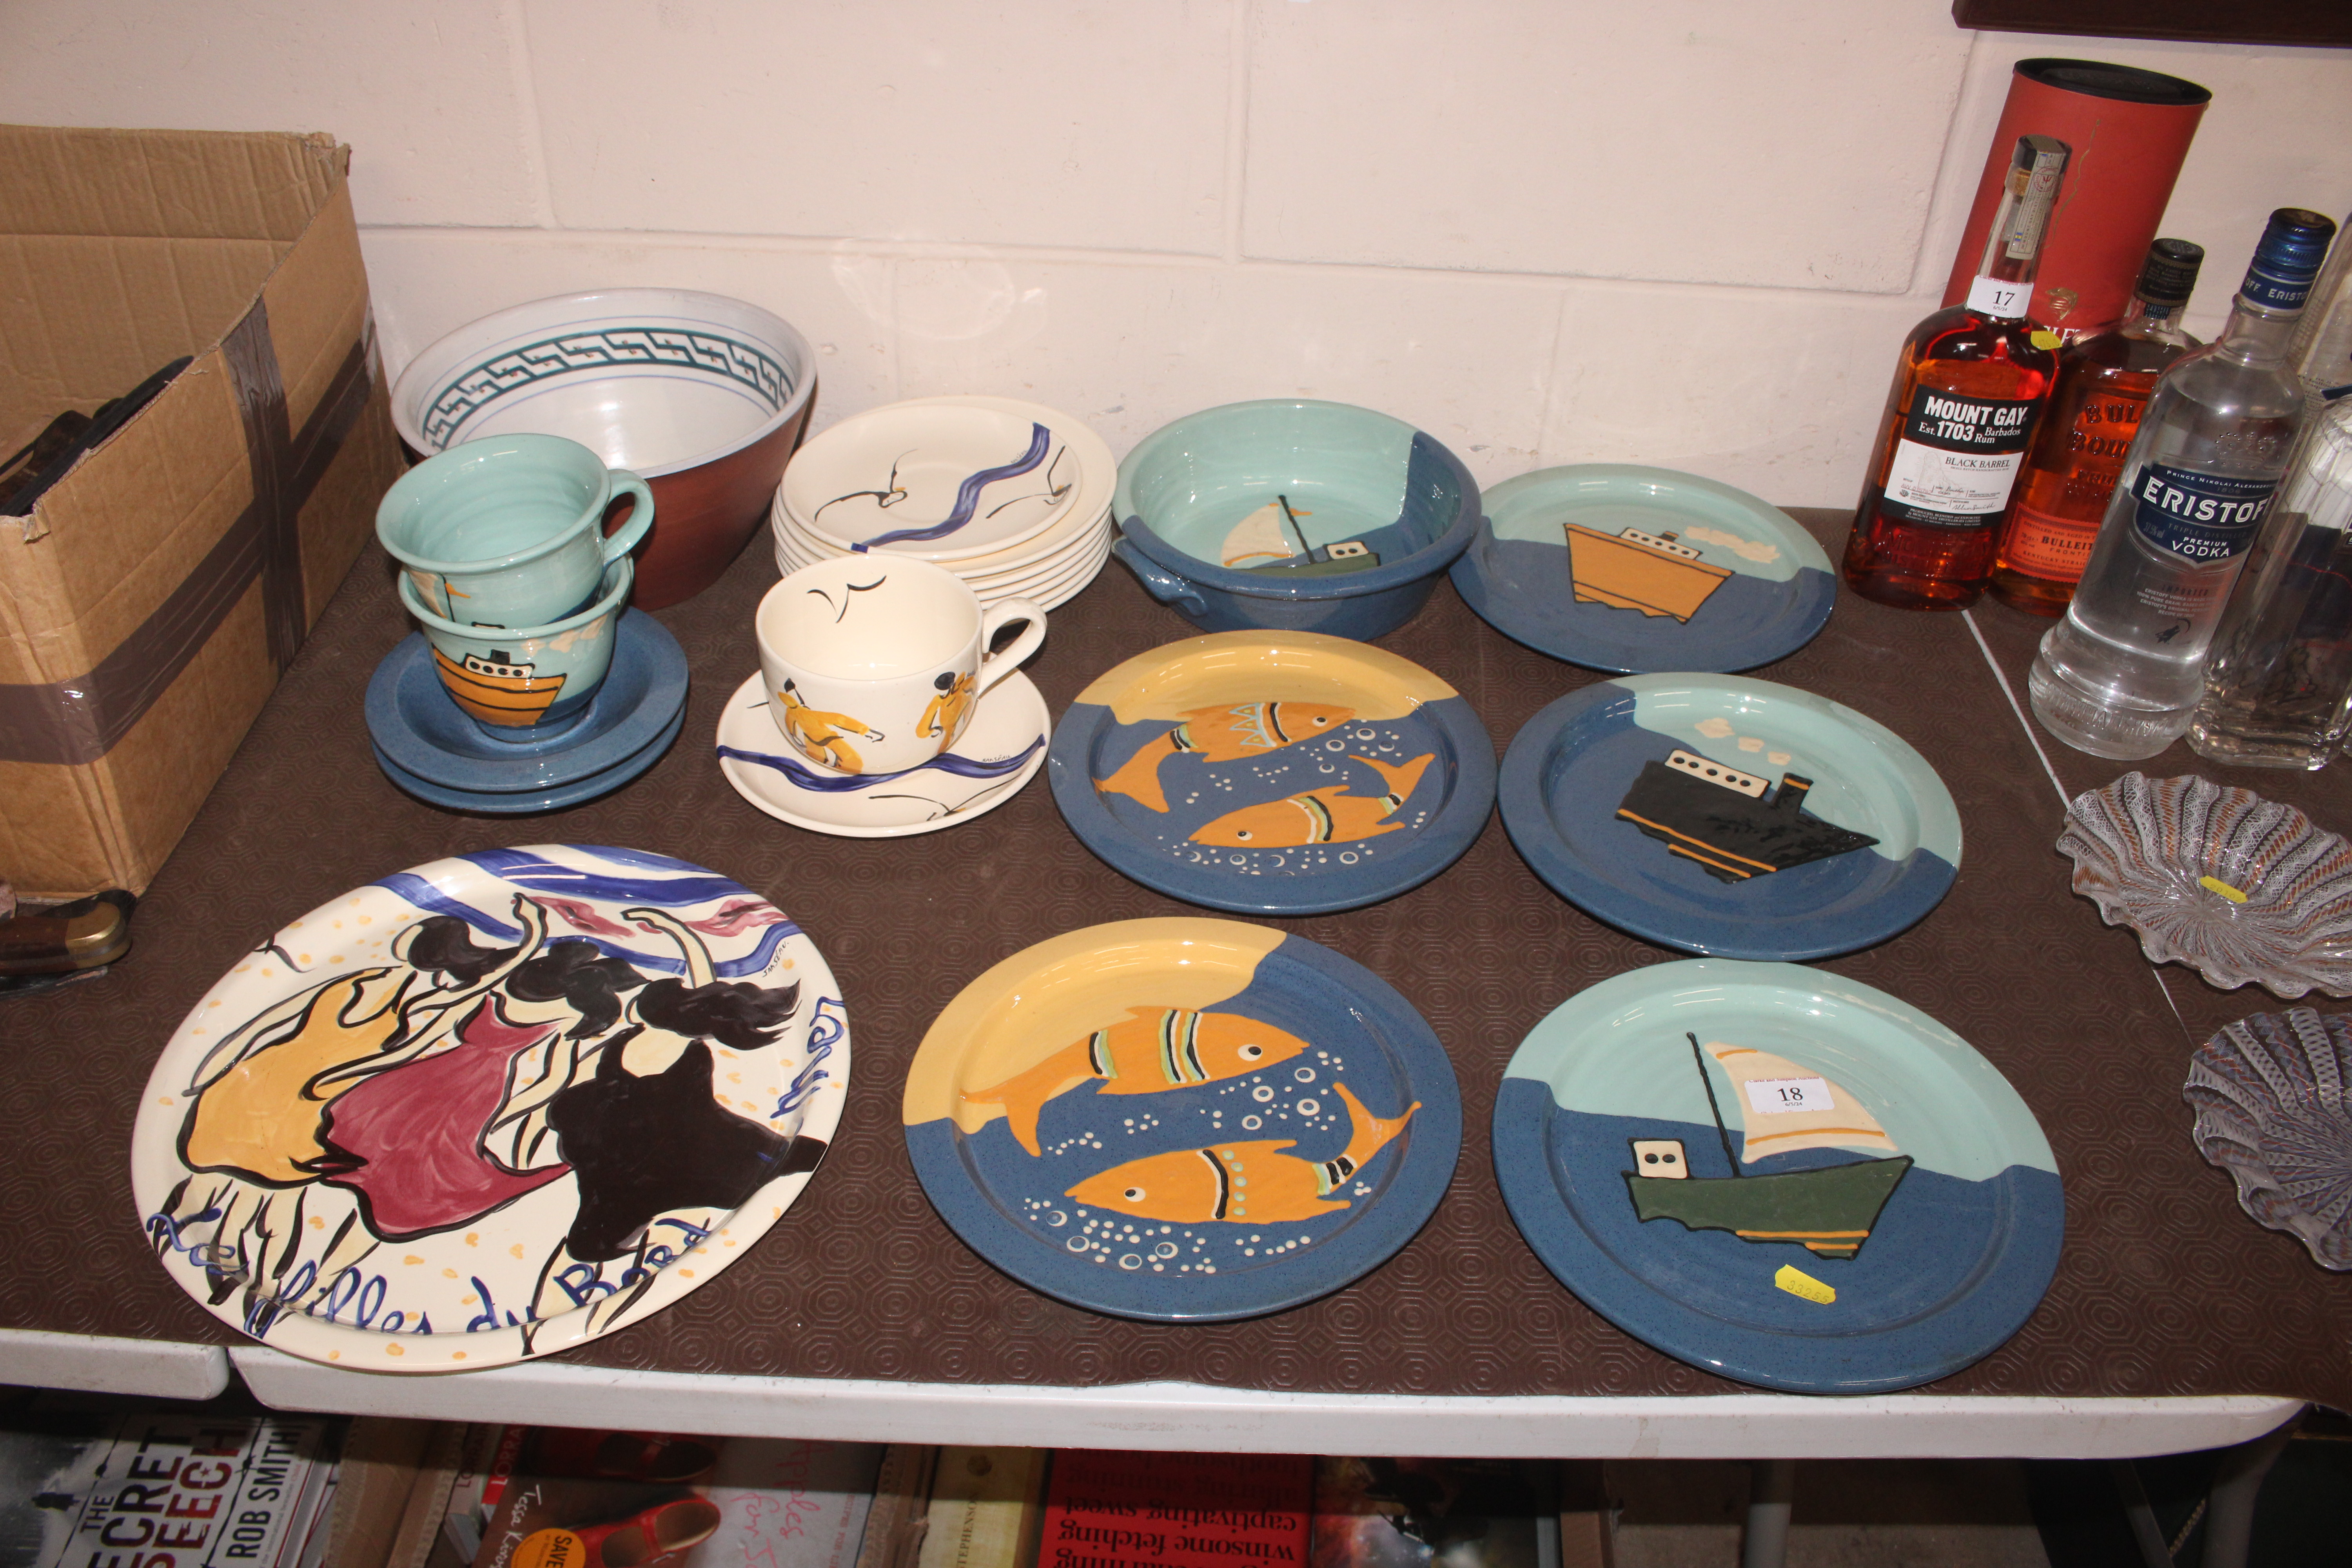 A quantity of decorative bowls and plates